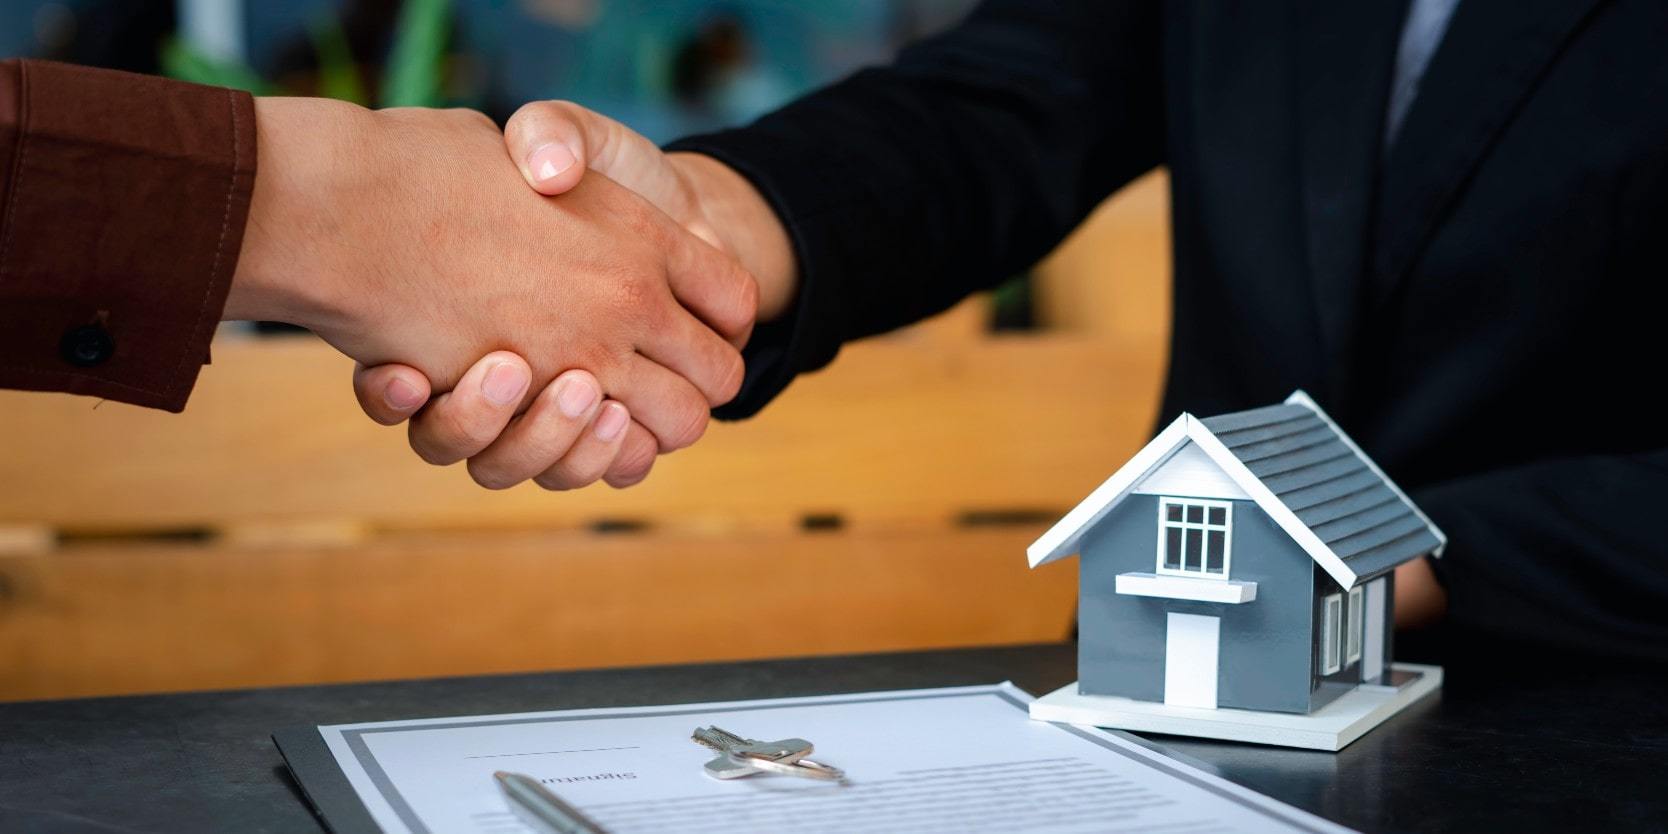 People shaking hands over a Toronto real estate assignment contract and model of a home